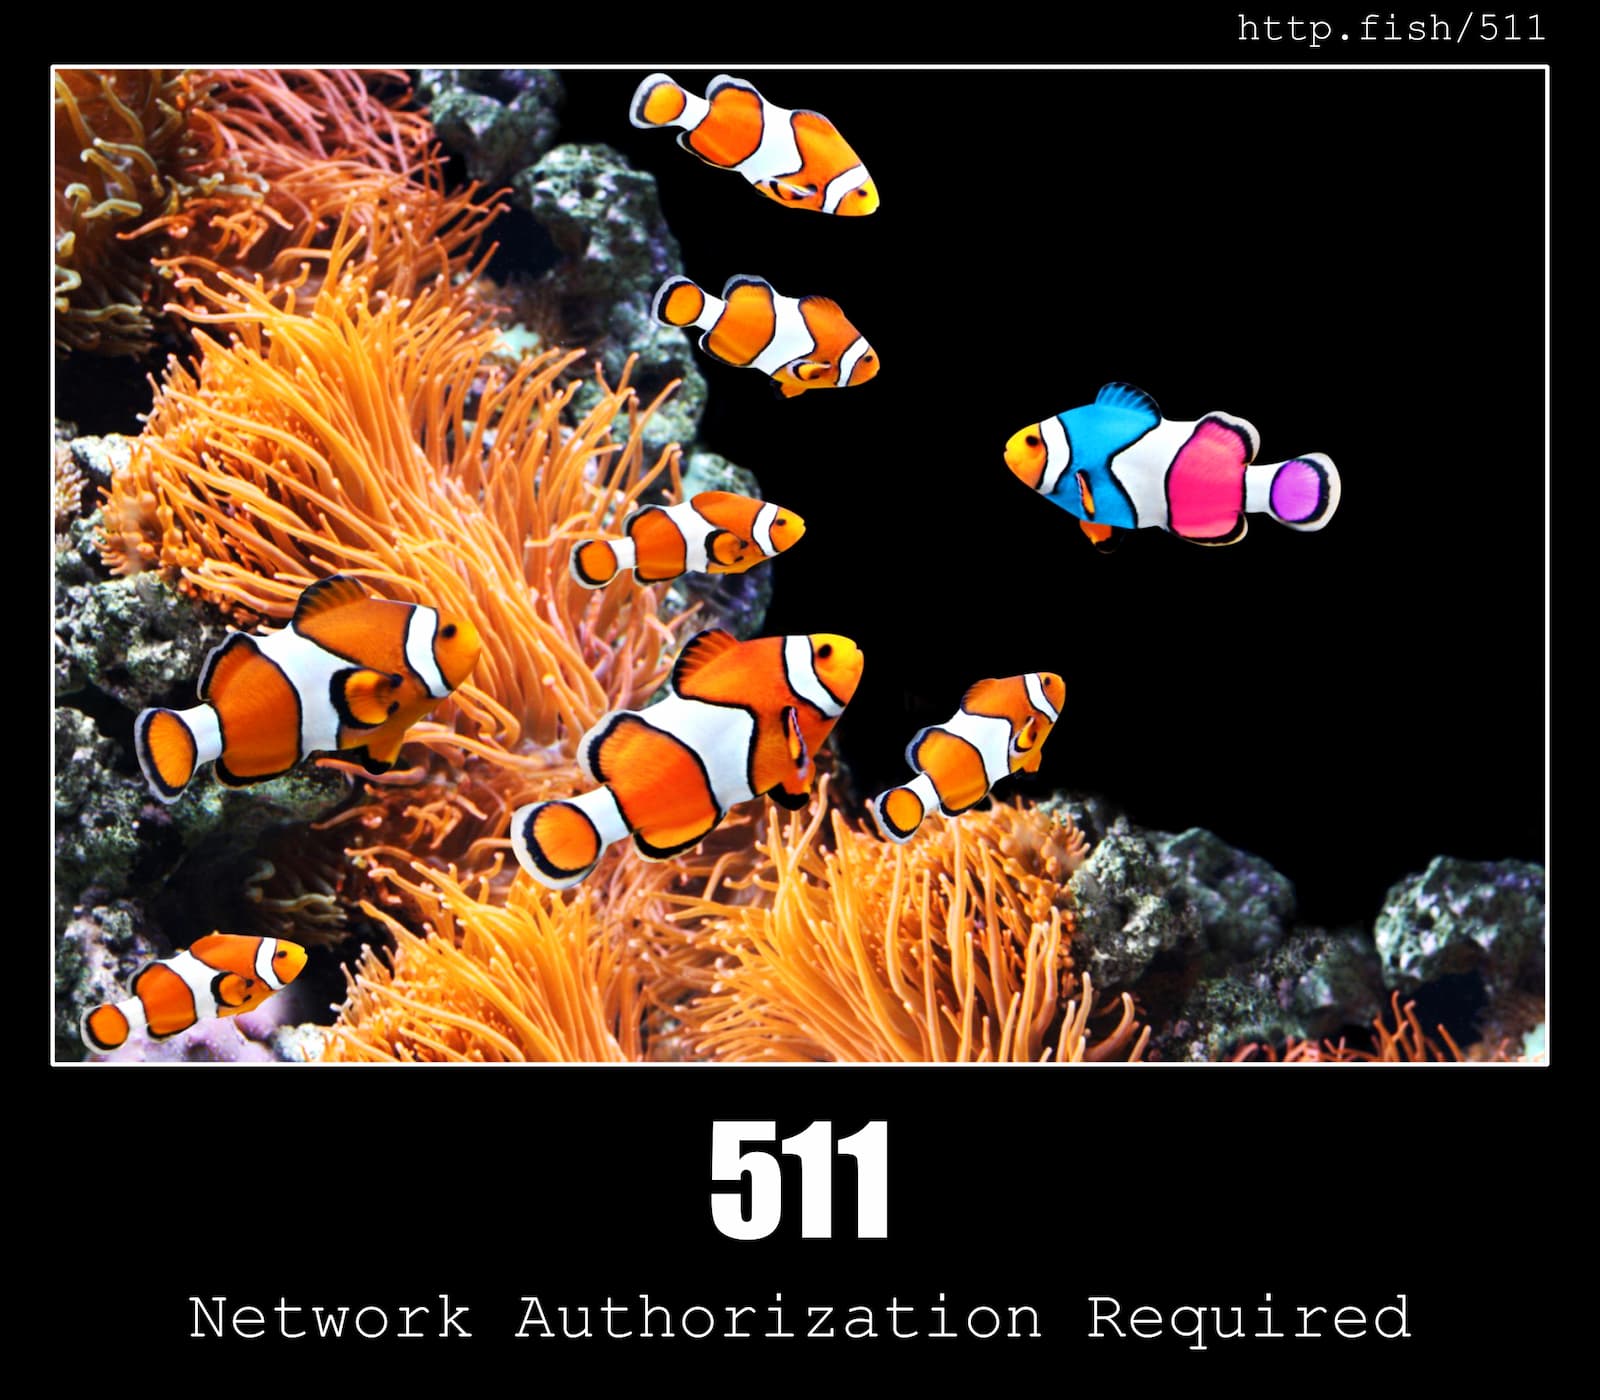 HTTP Status Code 511 Network Authentication Required & Fish